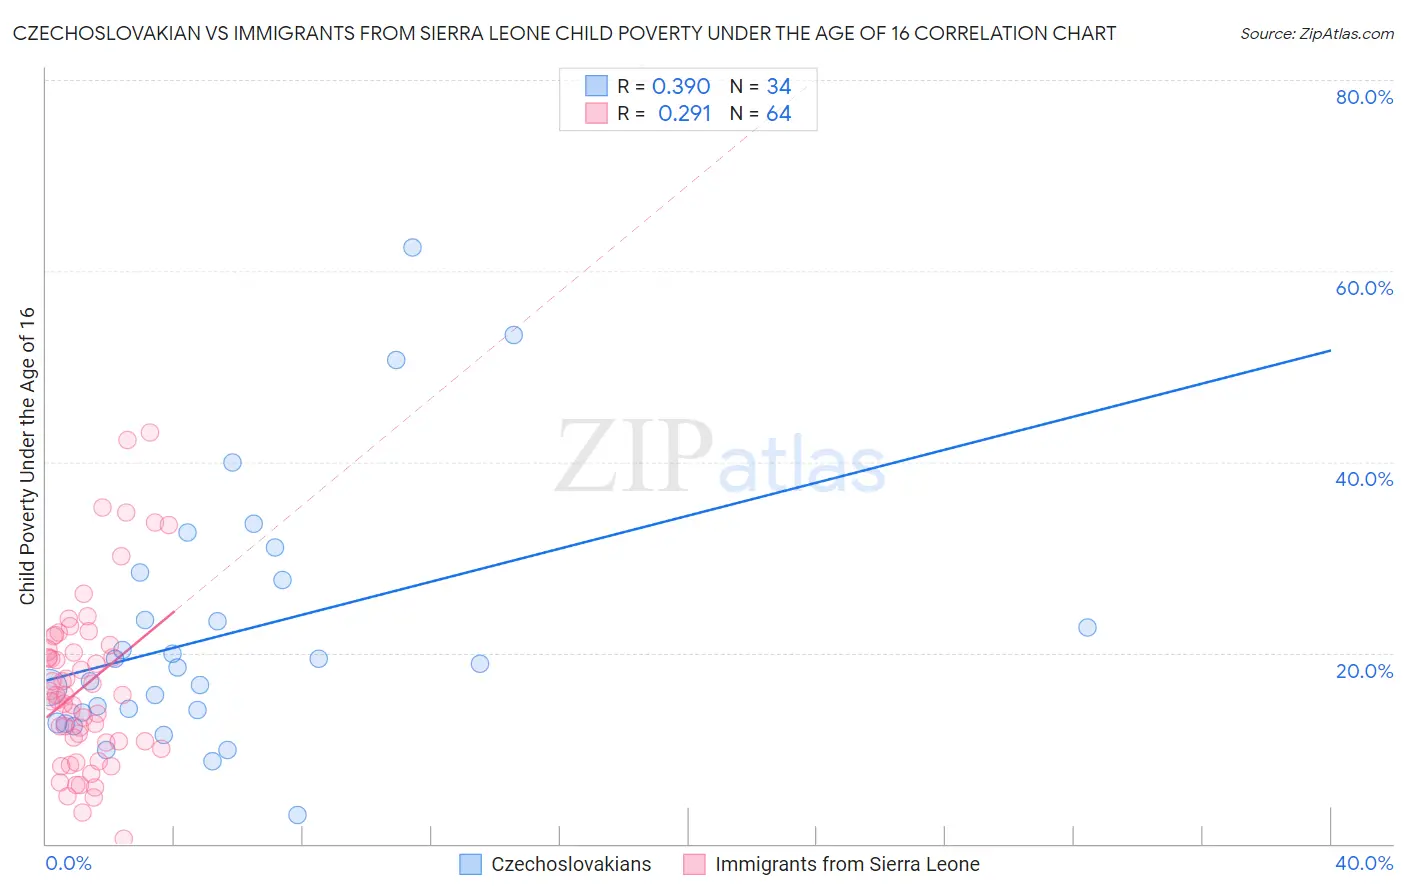 Czechoslovakian vs Immigrants from Sierra Leone Child Poverty Under the Age of 16